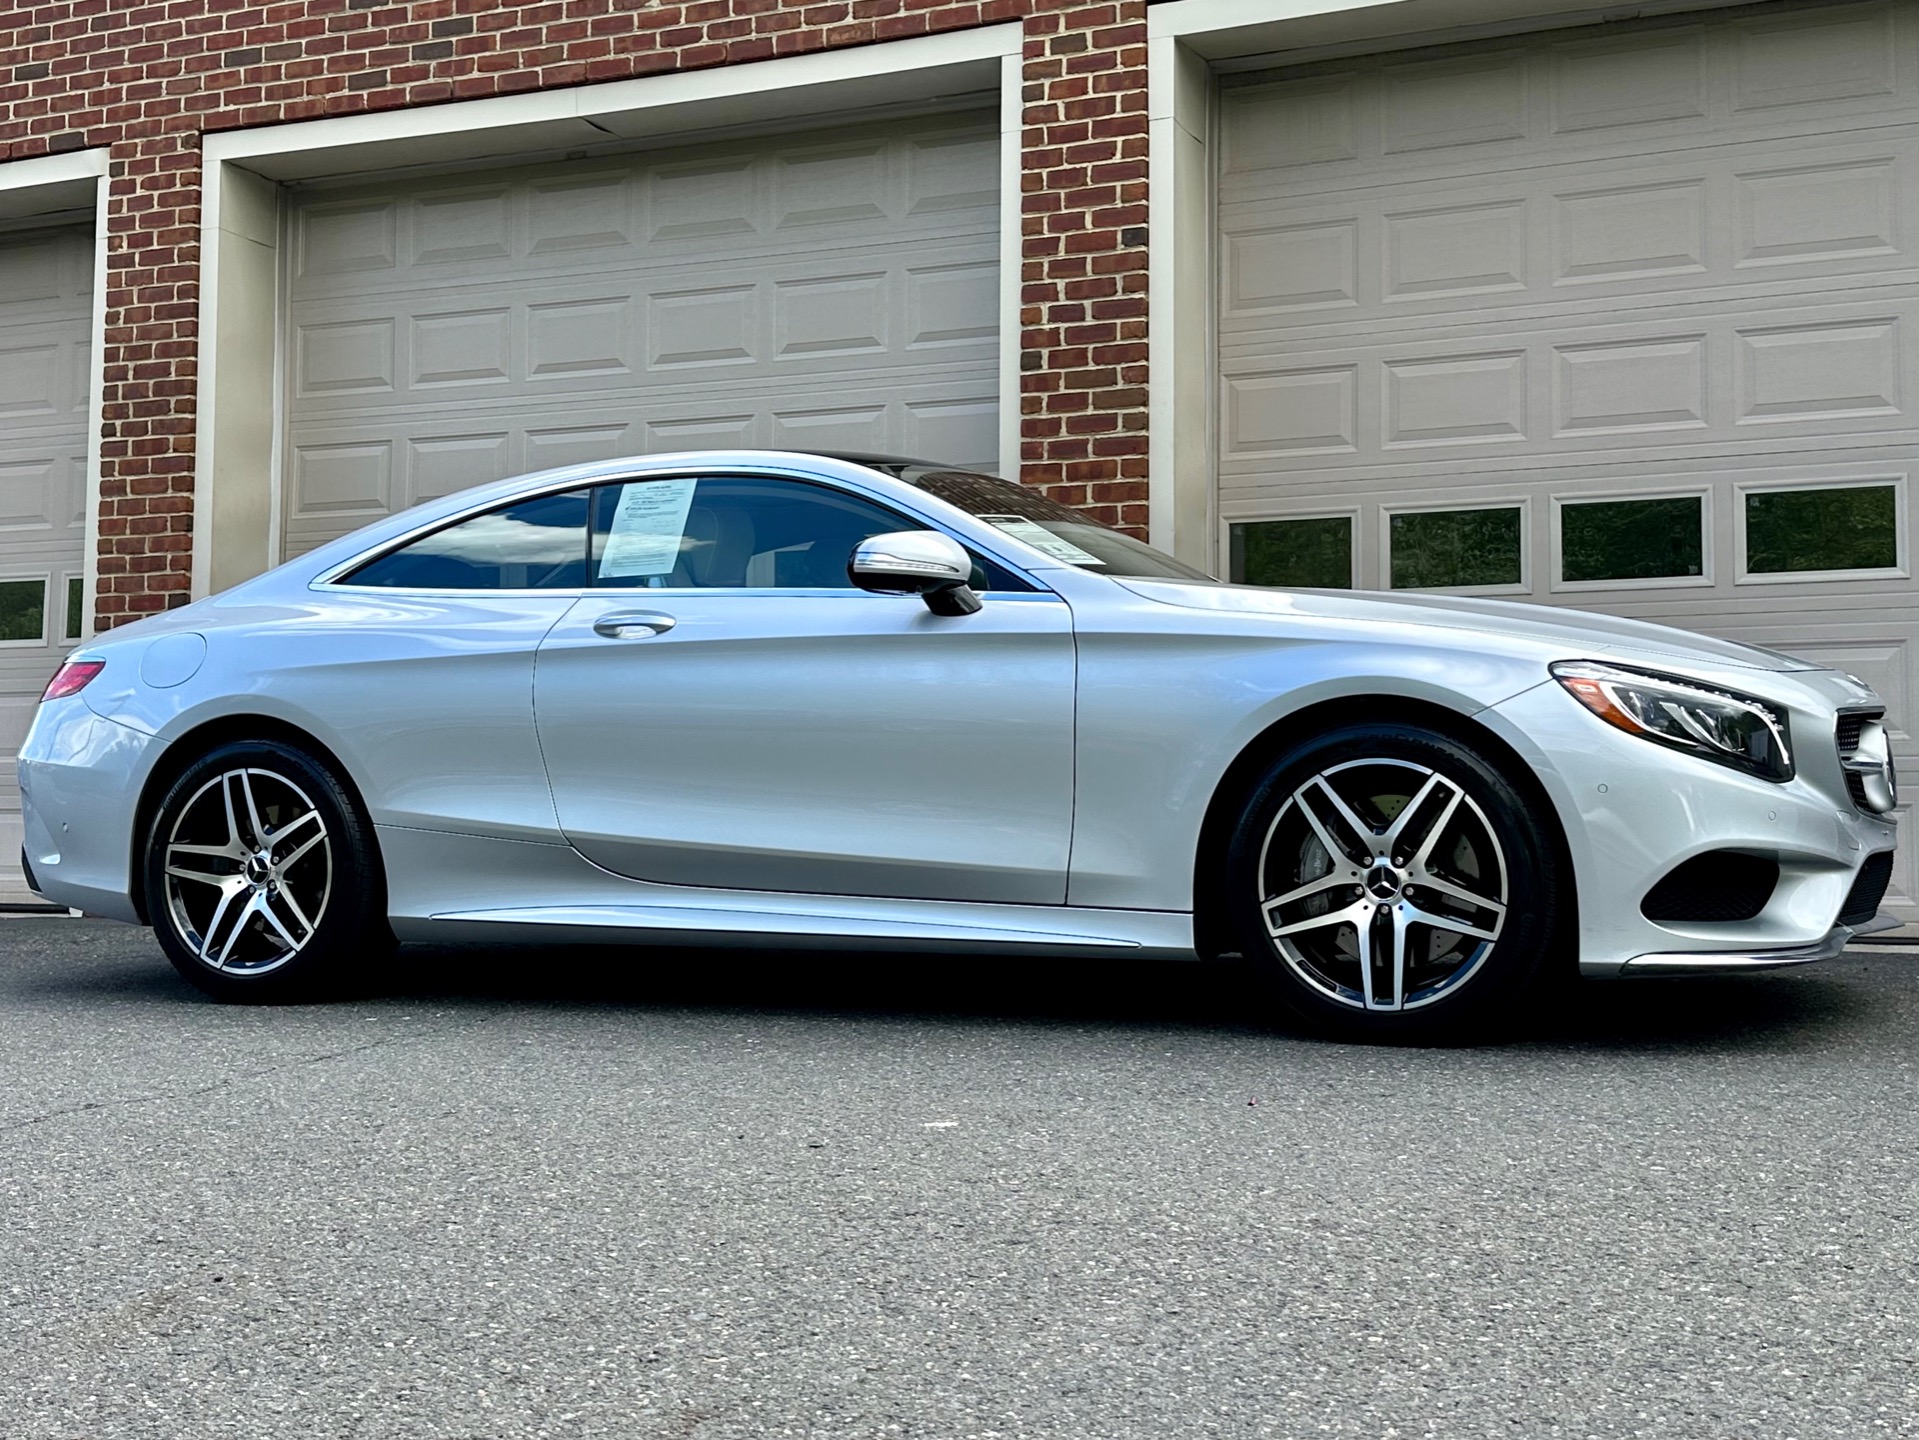 Used-2016-Mercedes-Benz-S-Class-S-550-4MATIC-Coupe